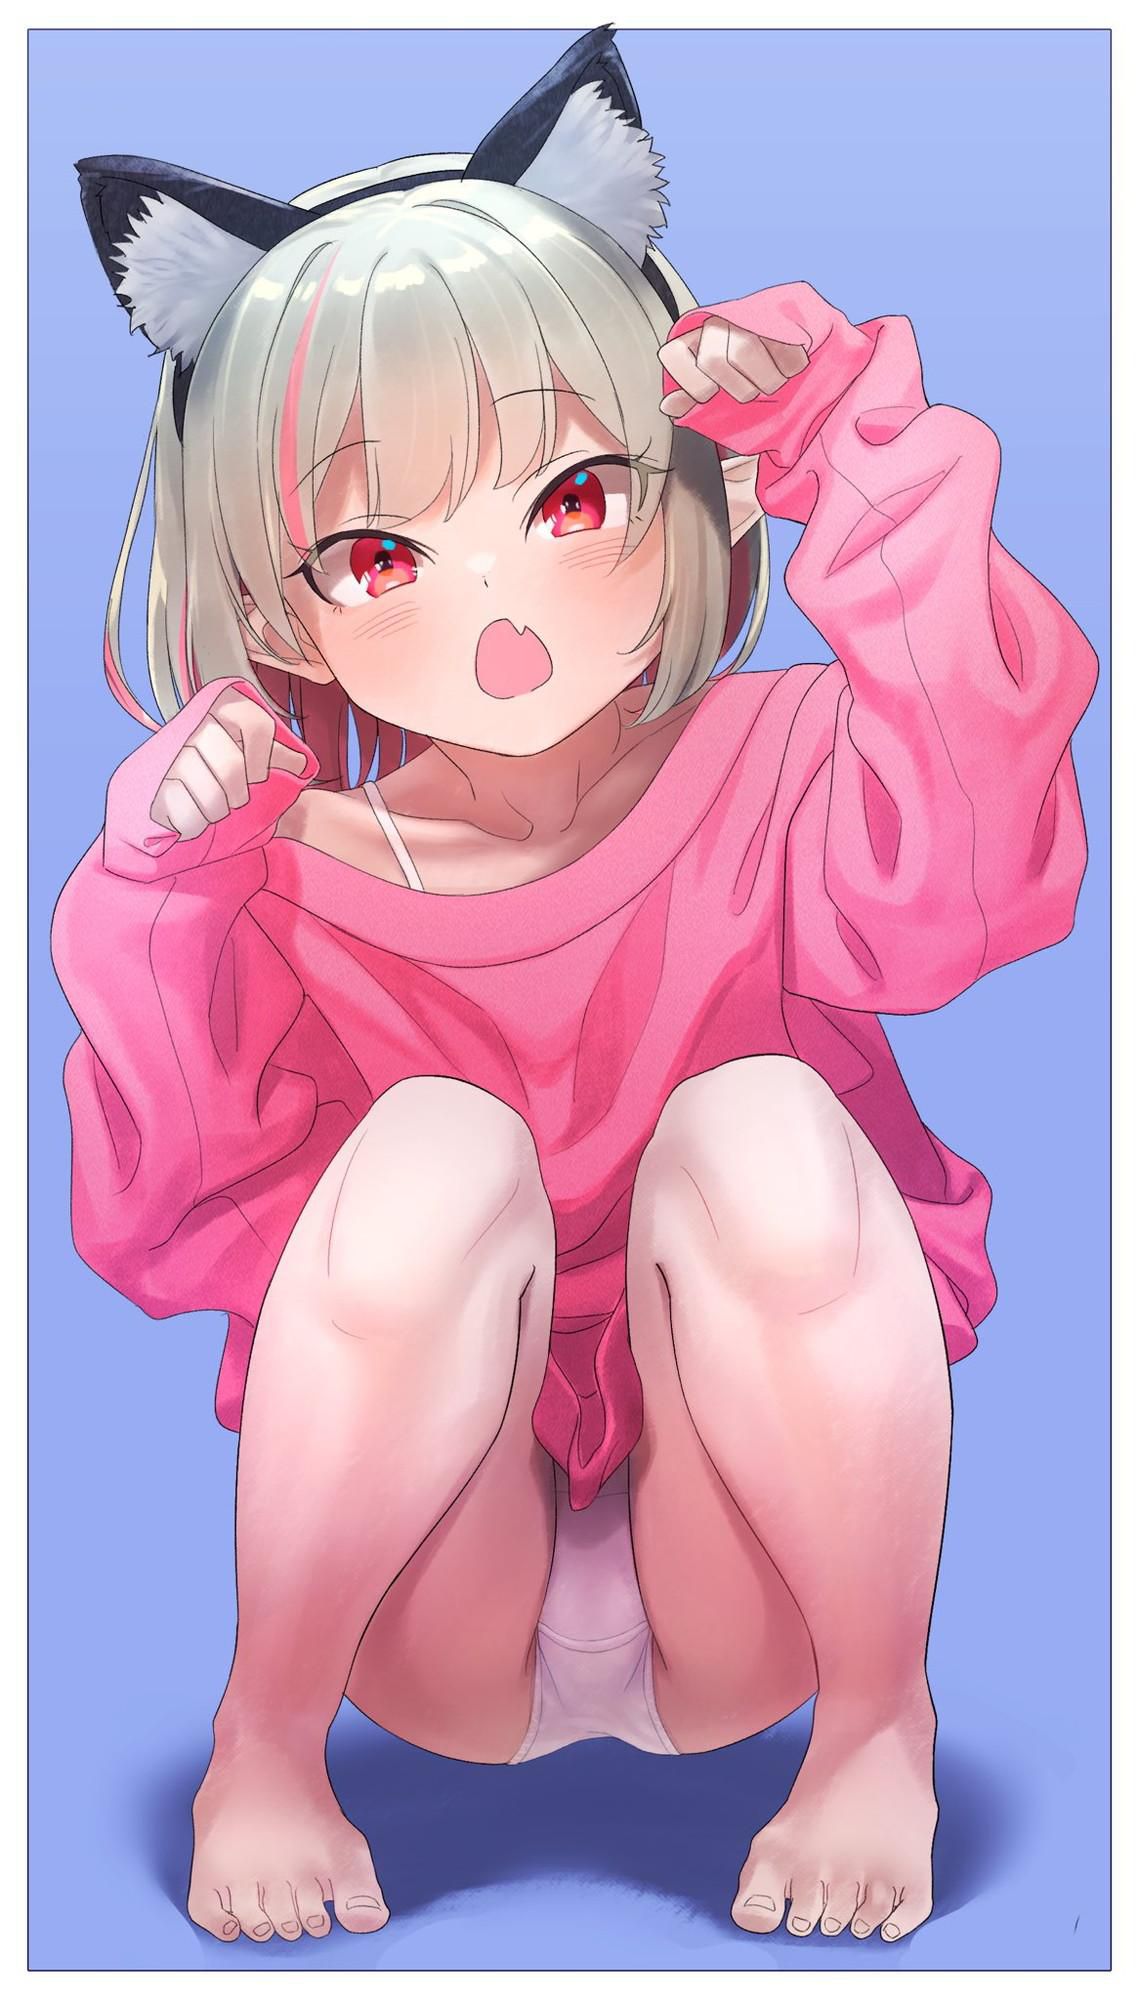 "Where are you looking~?" A soft-looking defenseless crotch image ♪ of a girl squatting with her eyes 48